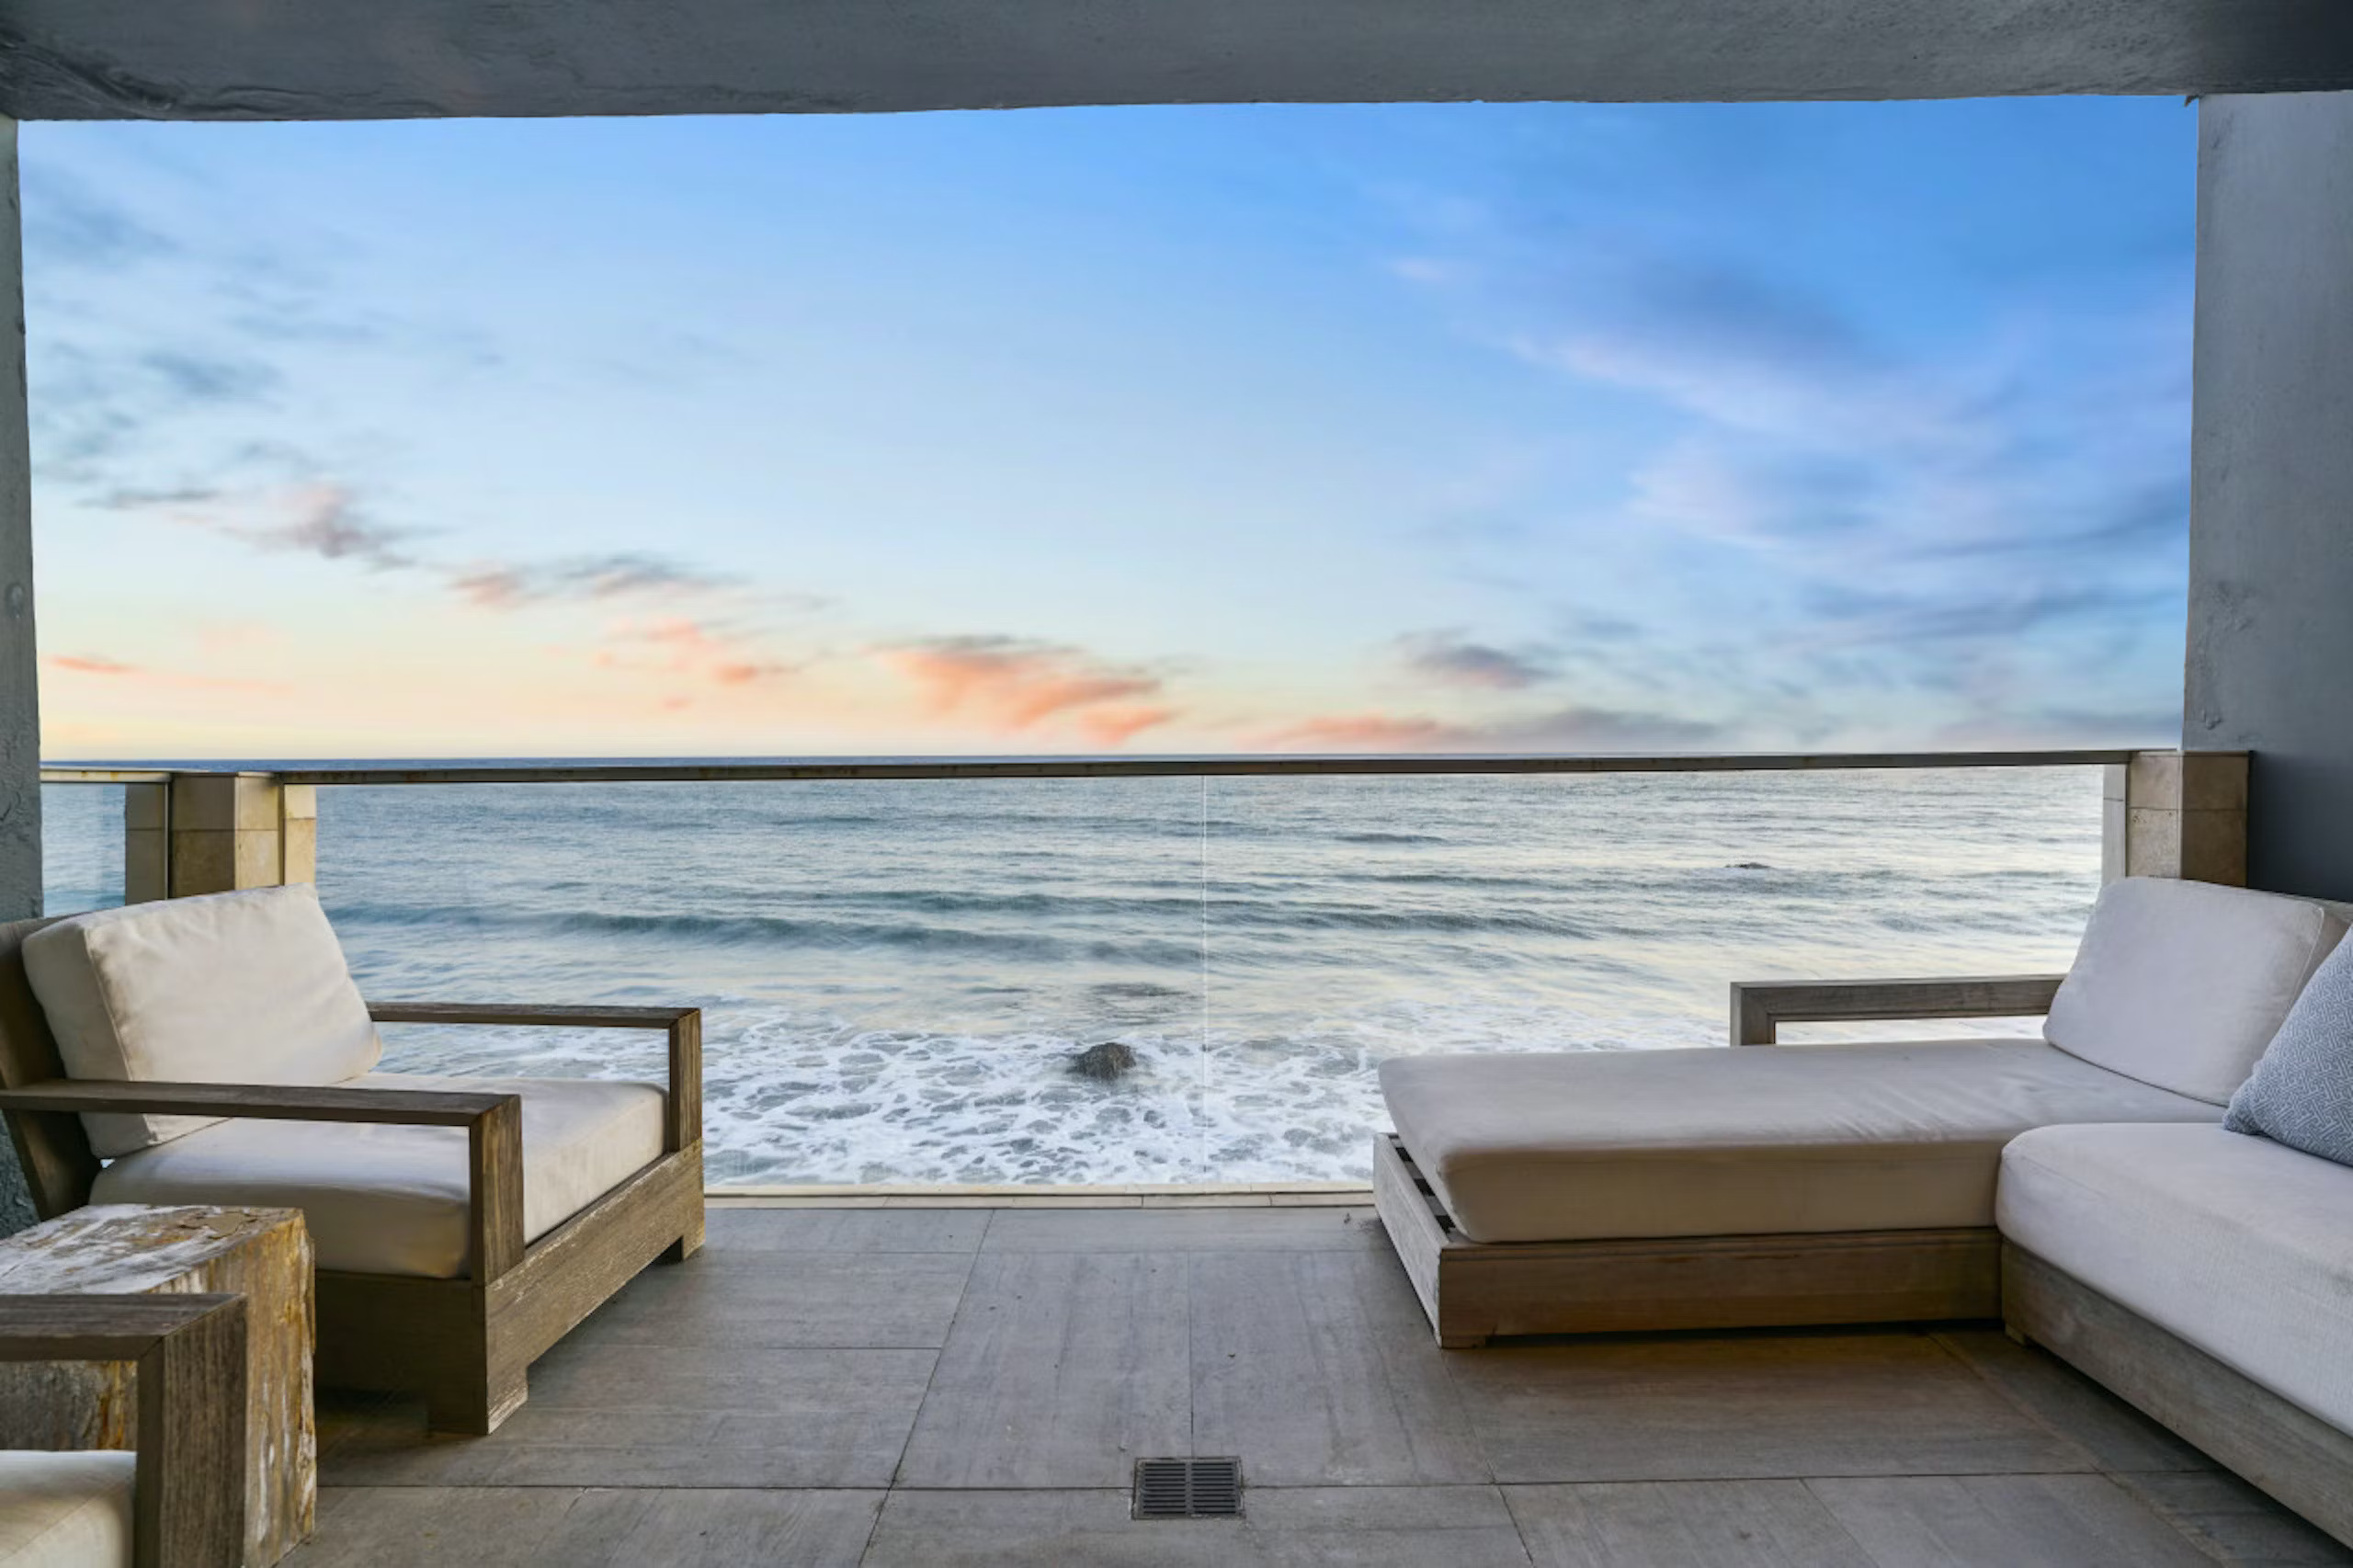 Pacific Ocean view with lounging furniture at coastal California vacation home rental in Malibu called Ocean Playlist.